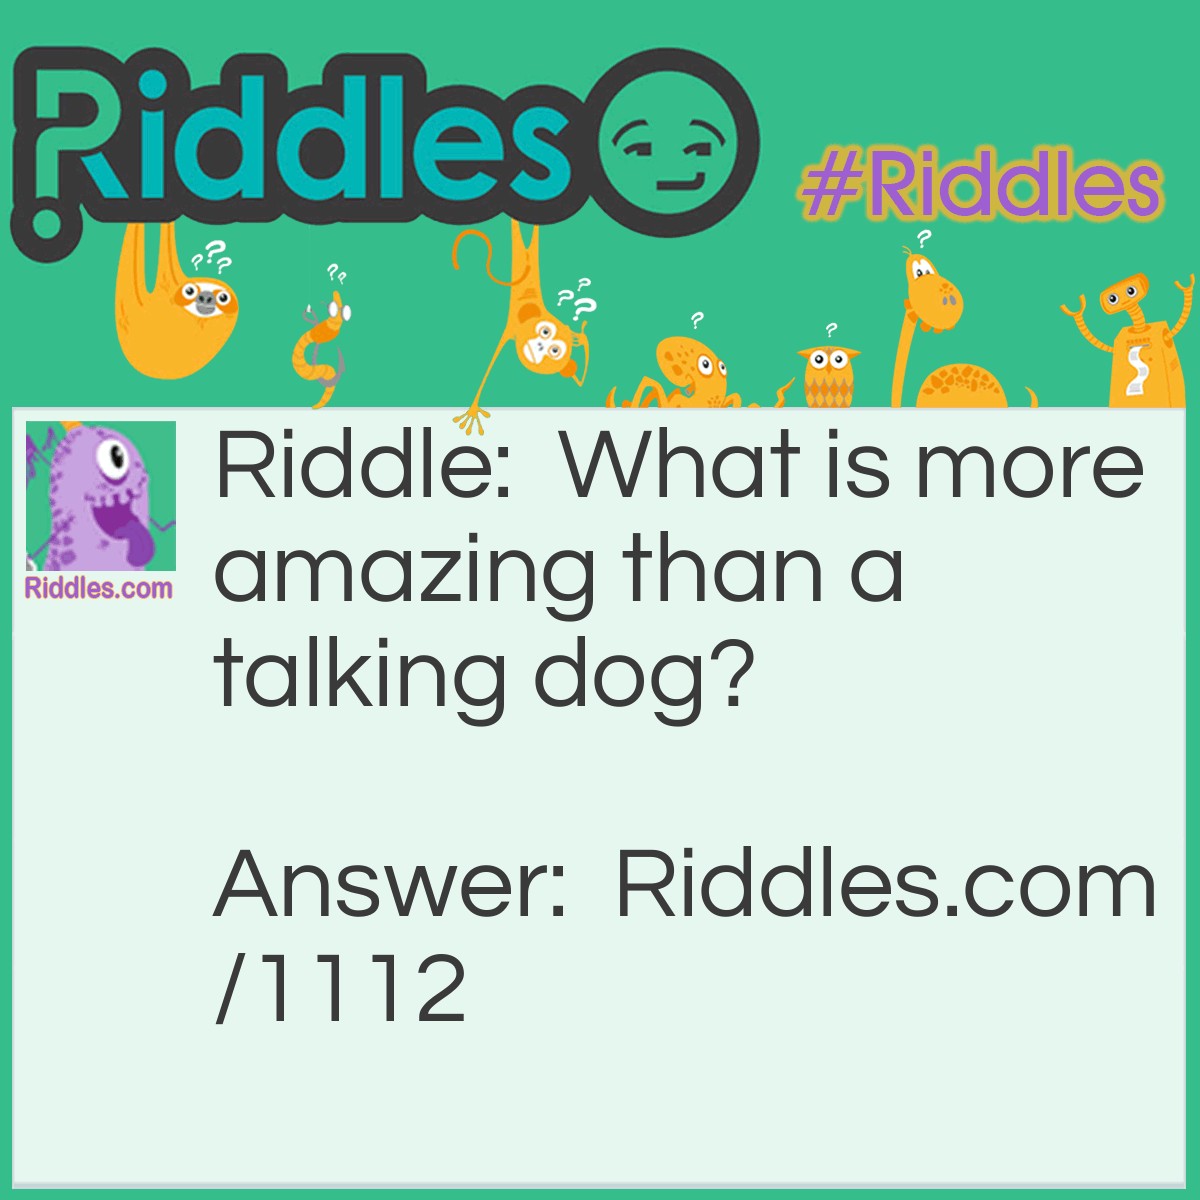 Riddle: What is more amazing than a talking dog? Answer: A spelling bee